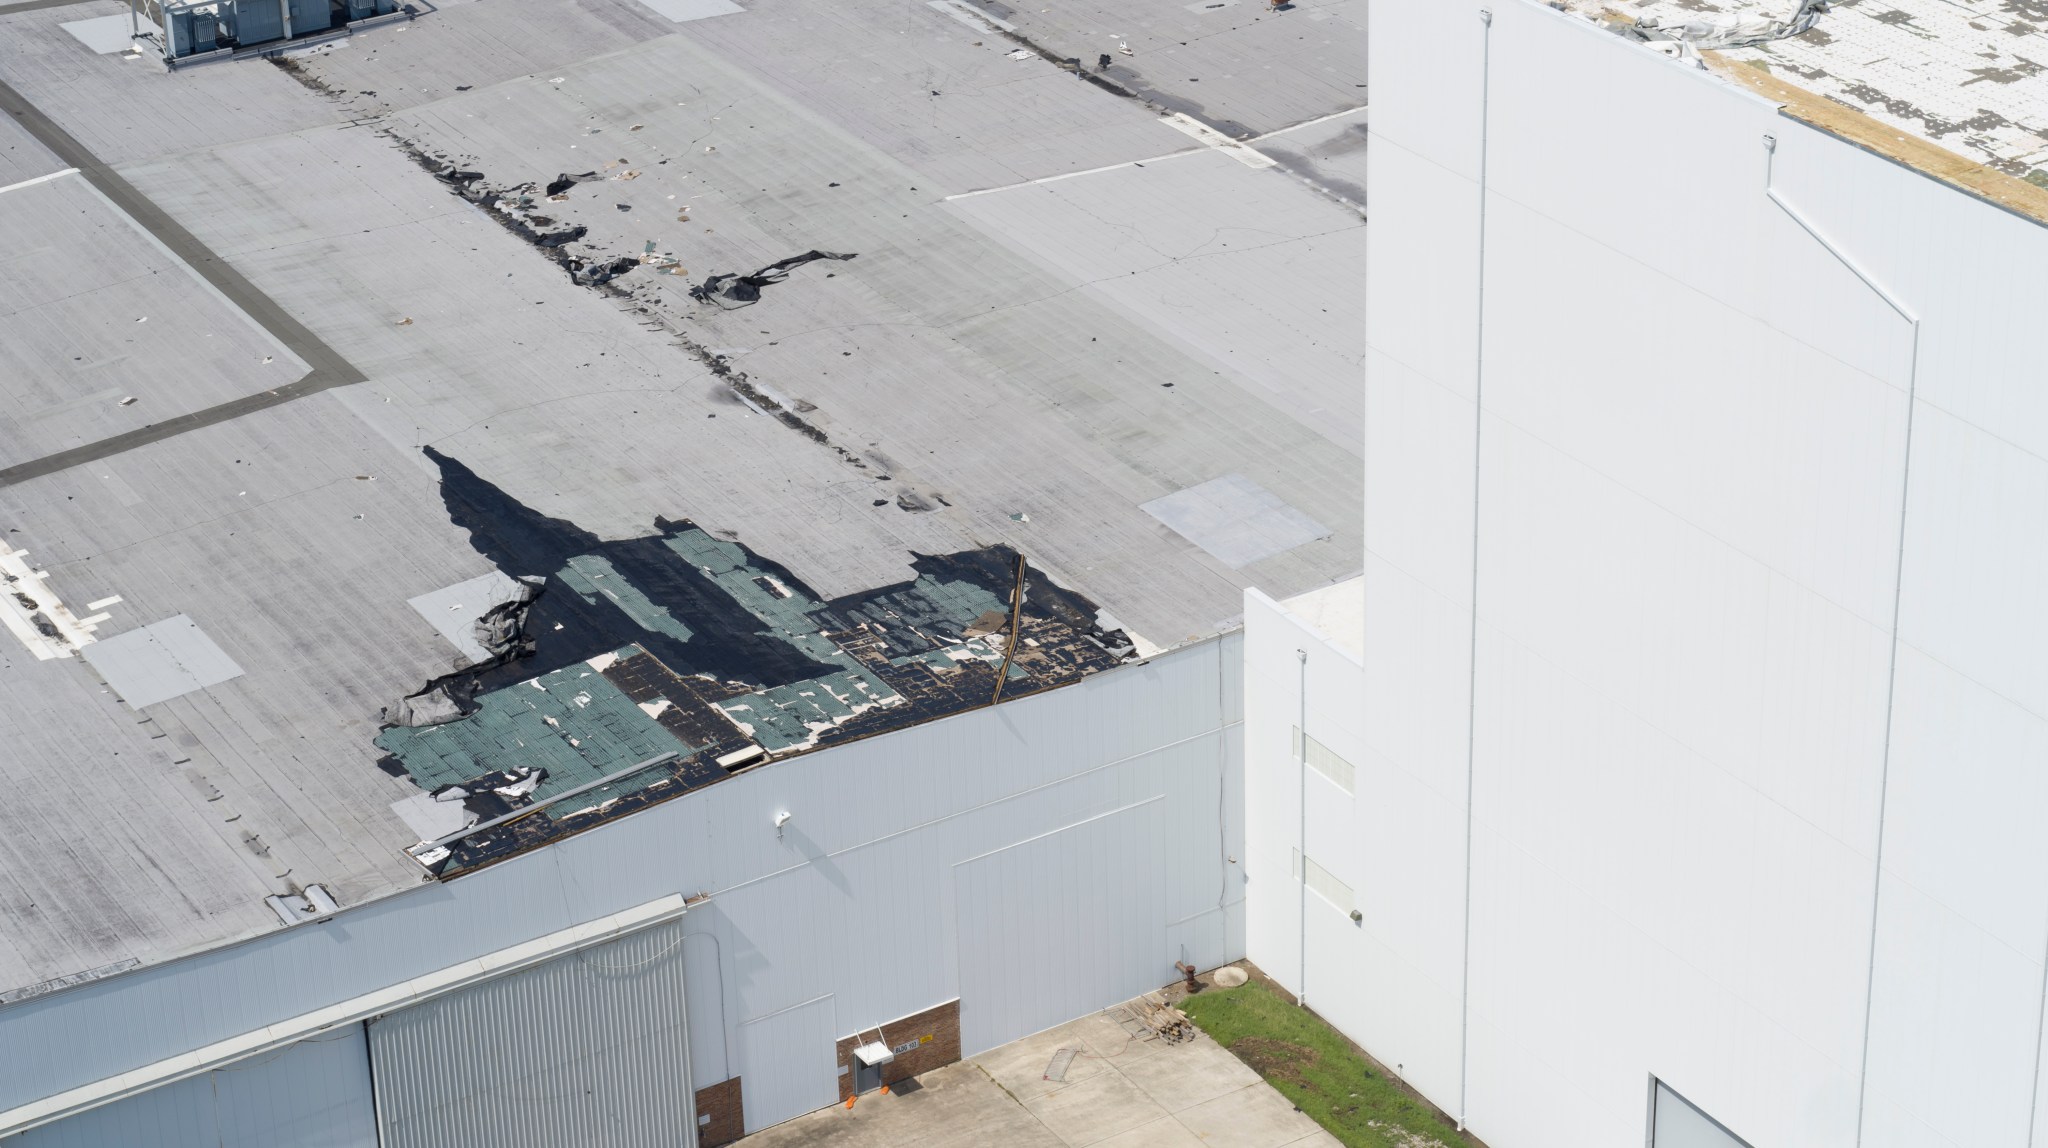 The roof of Building 103 at NASA’s Michoud Assembly Facility sustained damaged following Hurricane Ida on Aug. 29. 